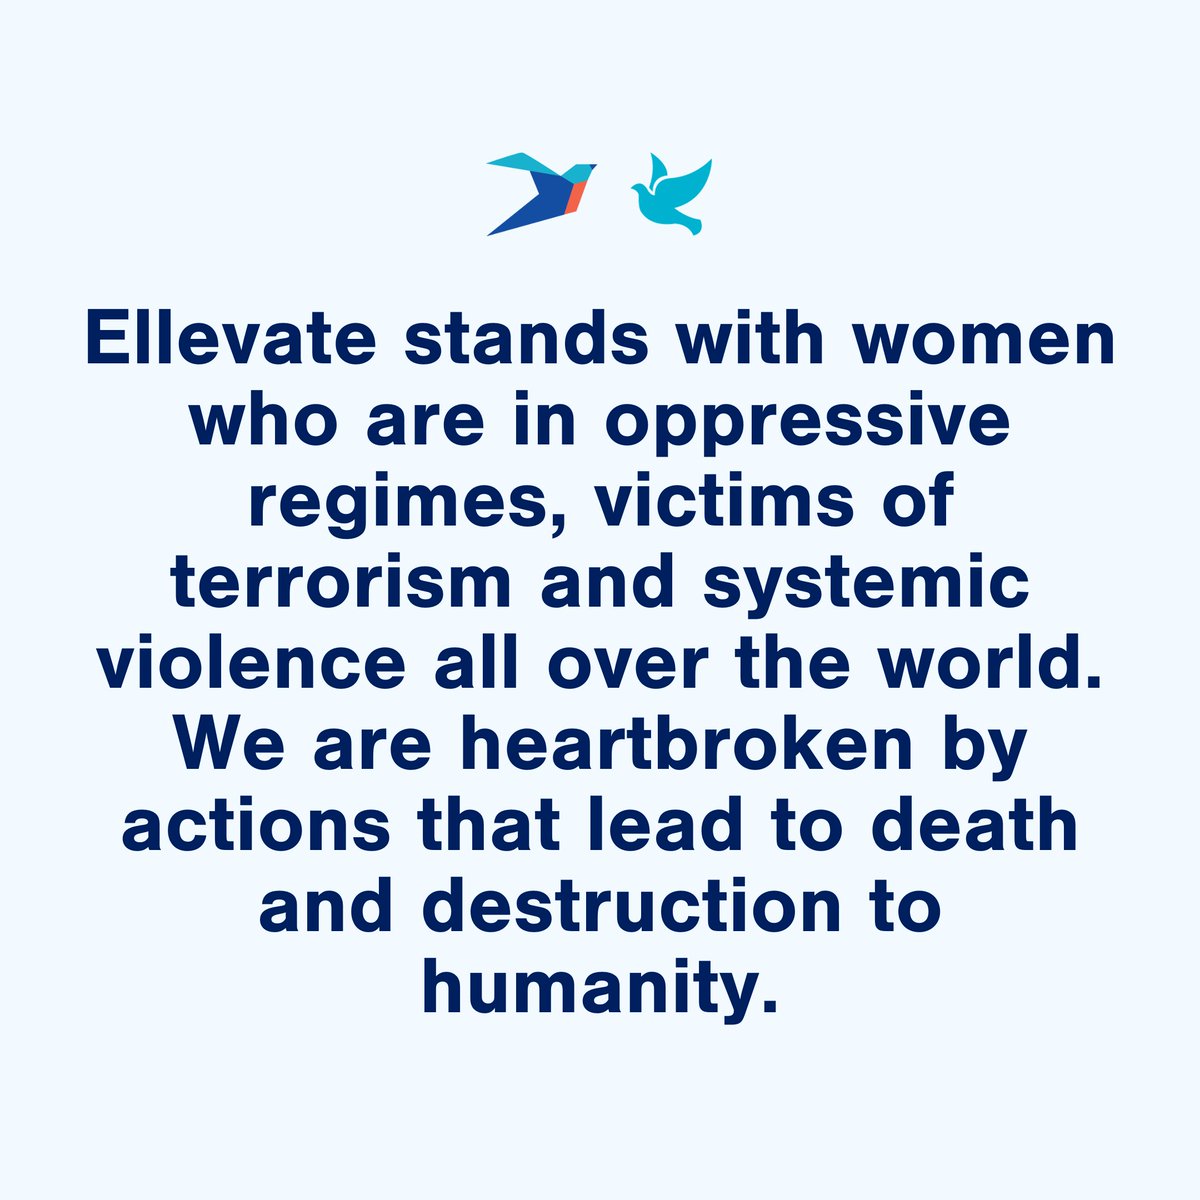 Ellevate stands with women who are in oppressive regimes, victims of terrorism and systemic violence all over the world. We are heartbroken by actions that lead to death and destruction of humanity.